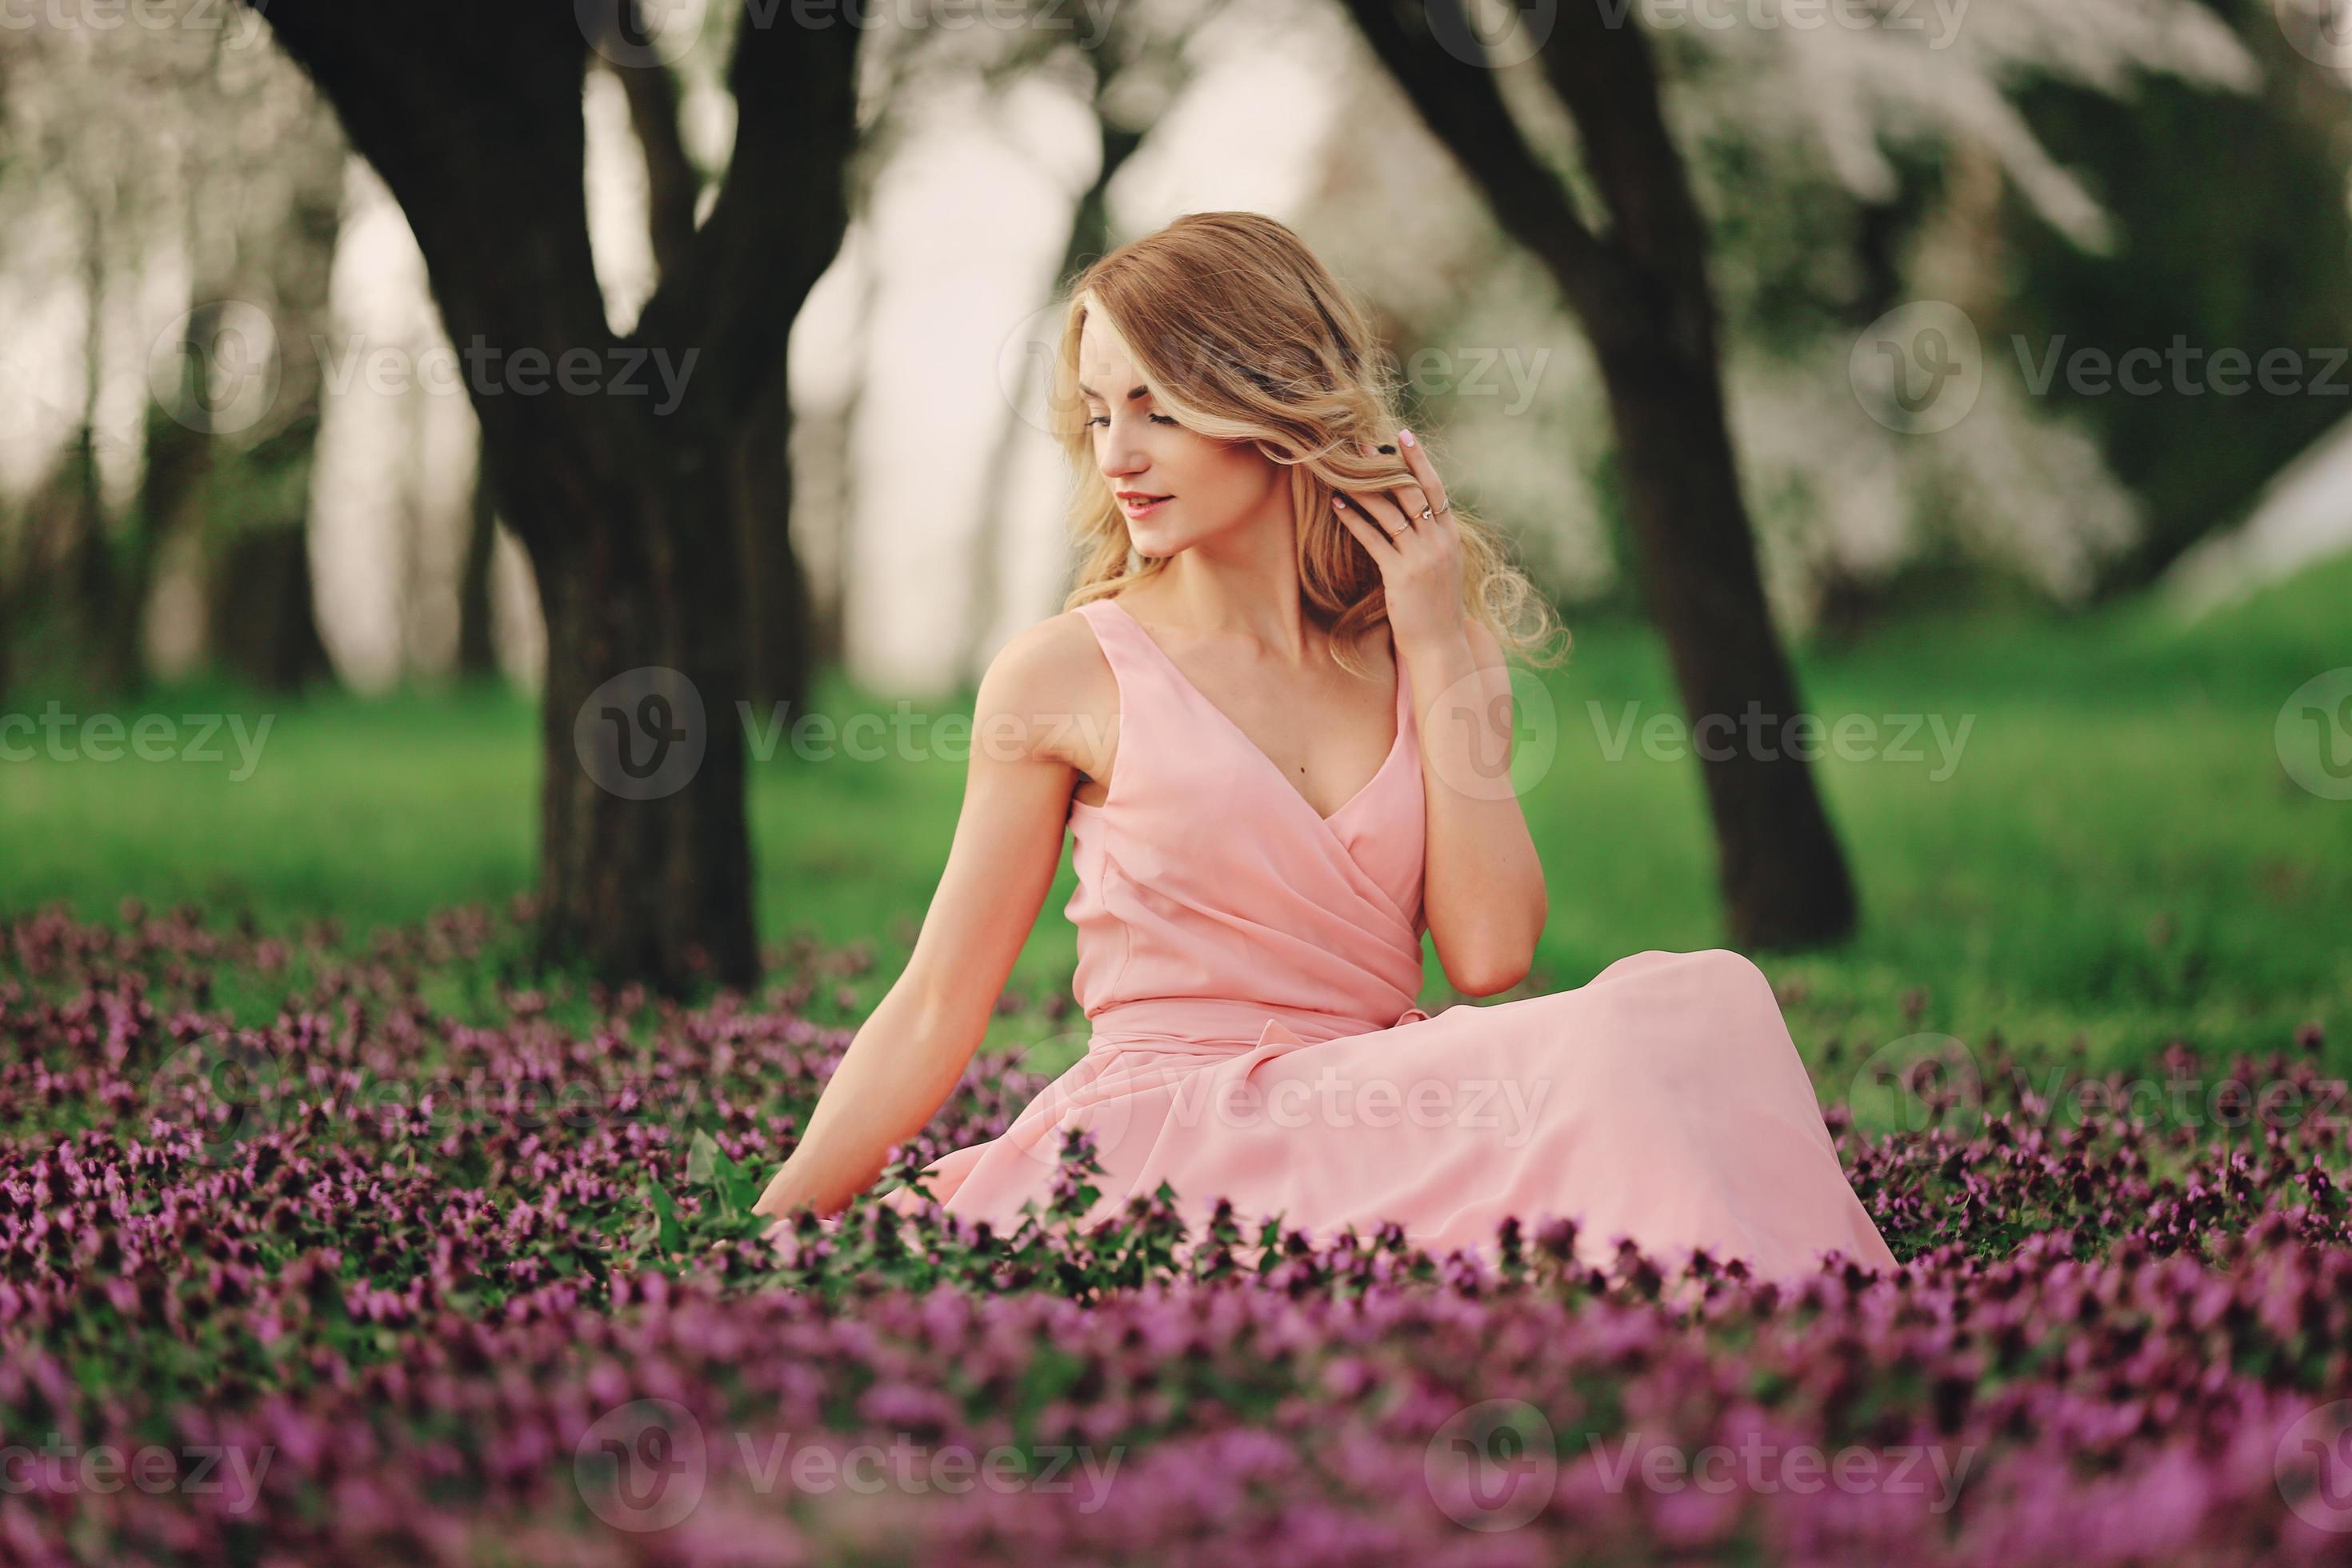 Beautiful blonde young woman in colorful flowers. girl with make-up and  hairstyle in pink dress in blossoming spring park. Art work of romantic  woman. Pretty tenderness model looking at the camera 6629263